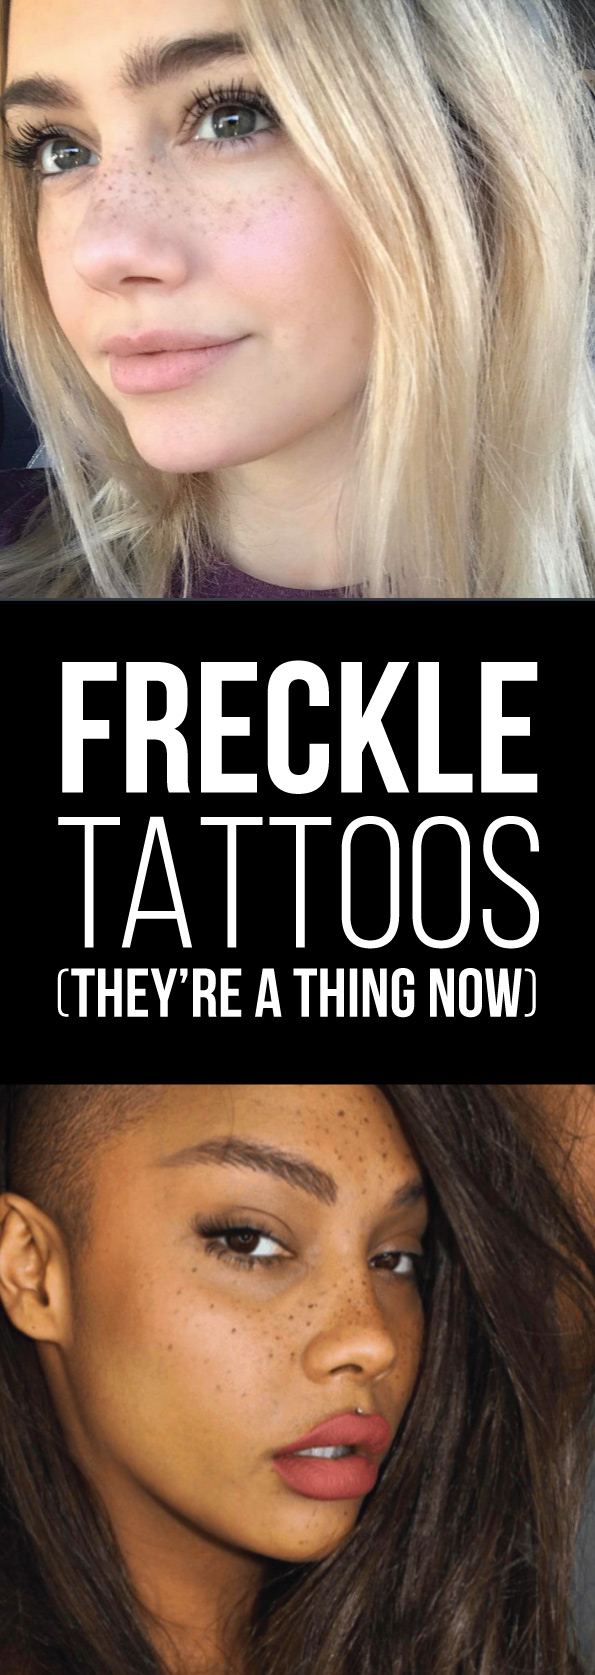 Freckle Tattoos are a Thing, And Here's 20 Awesome Examples